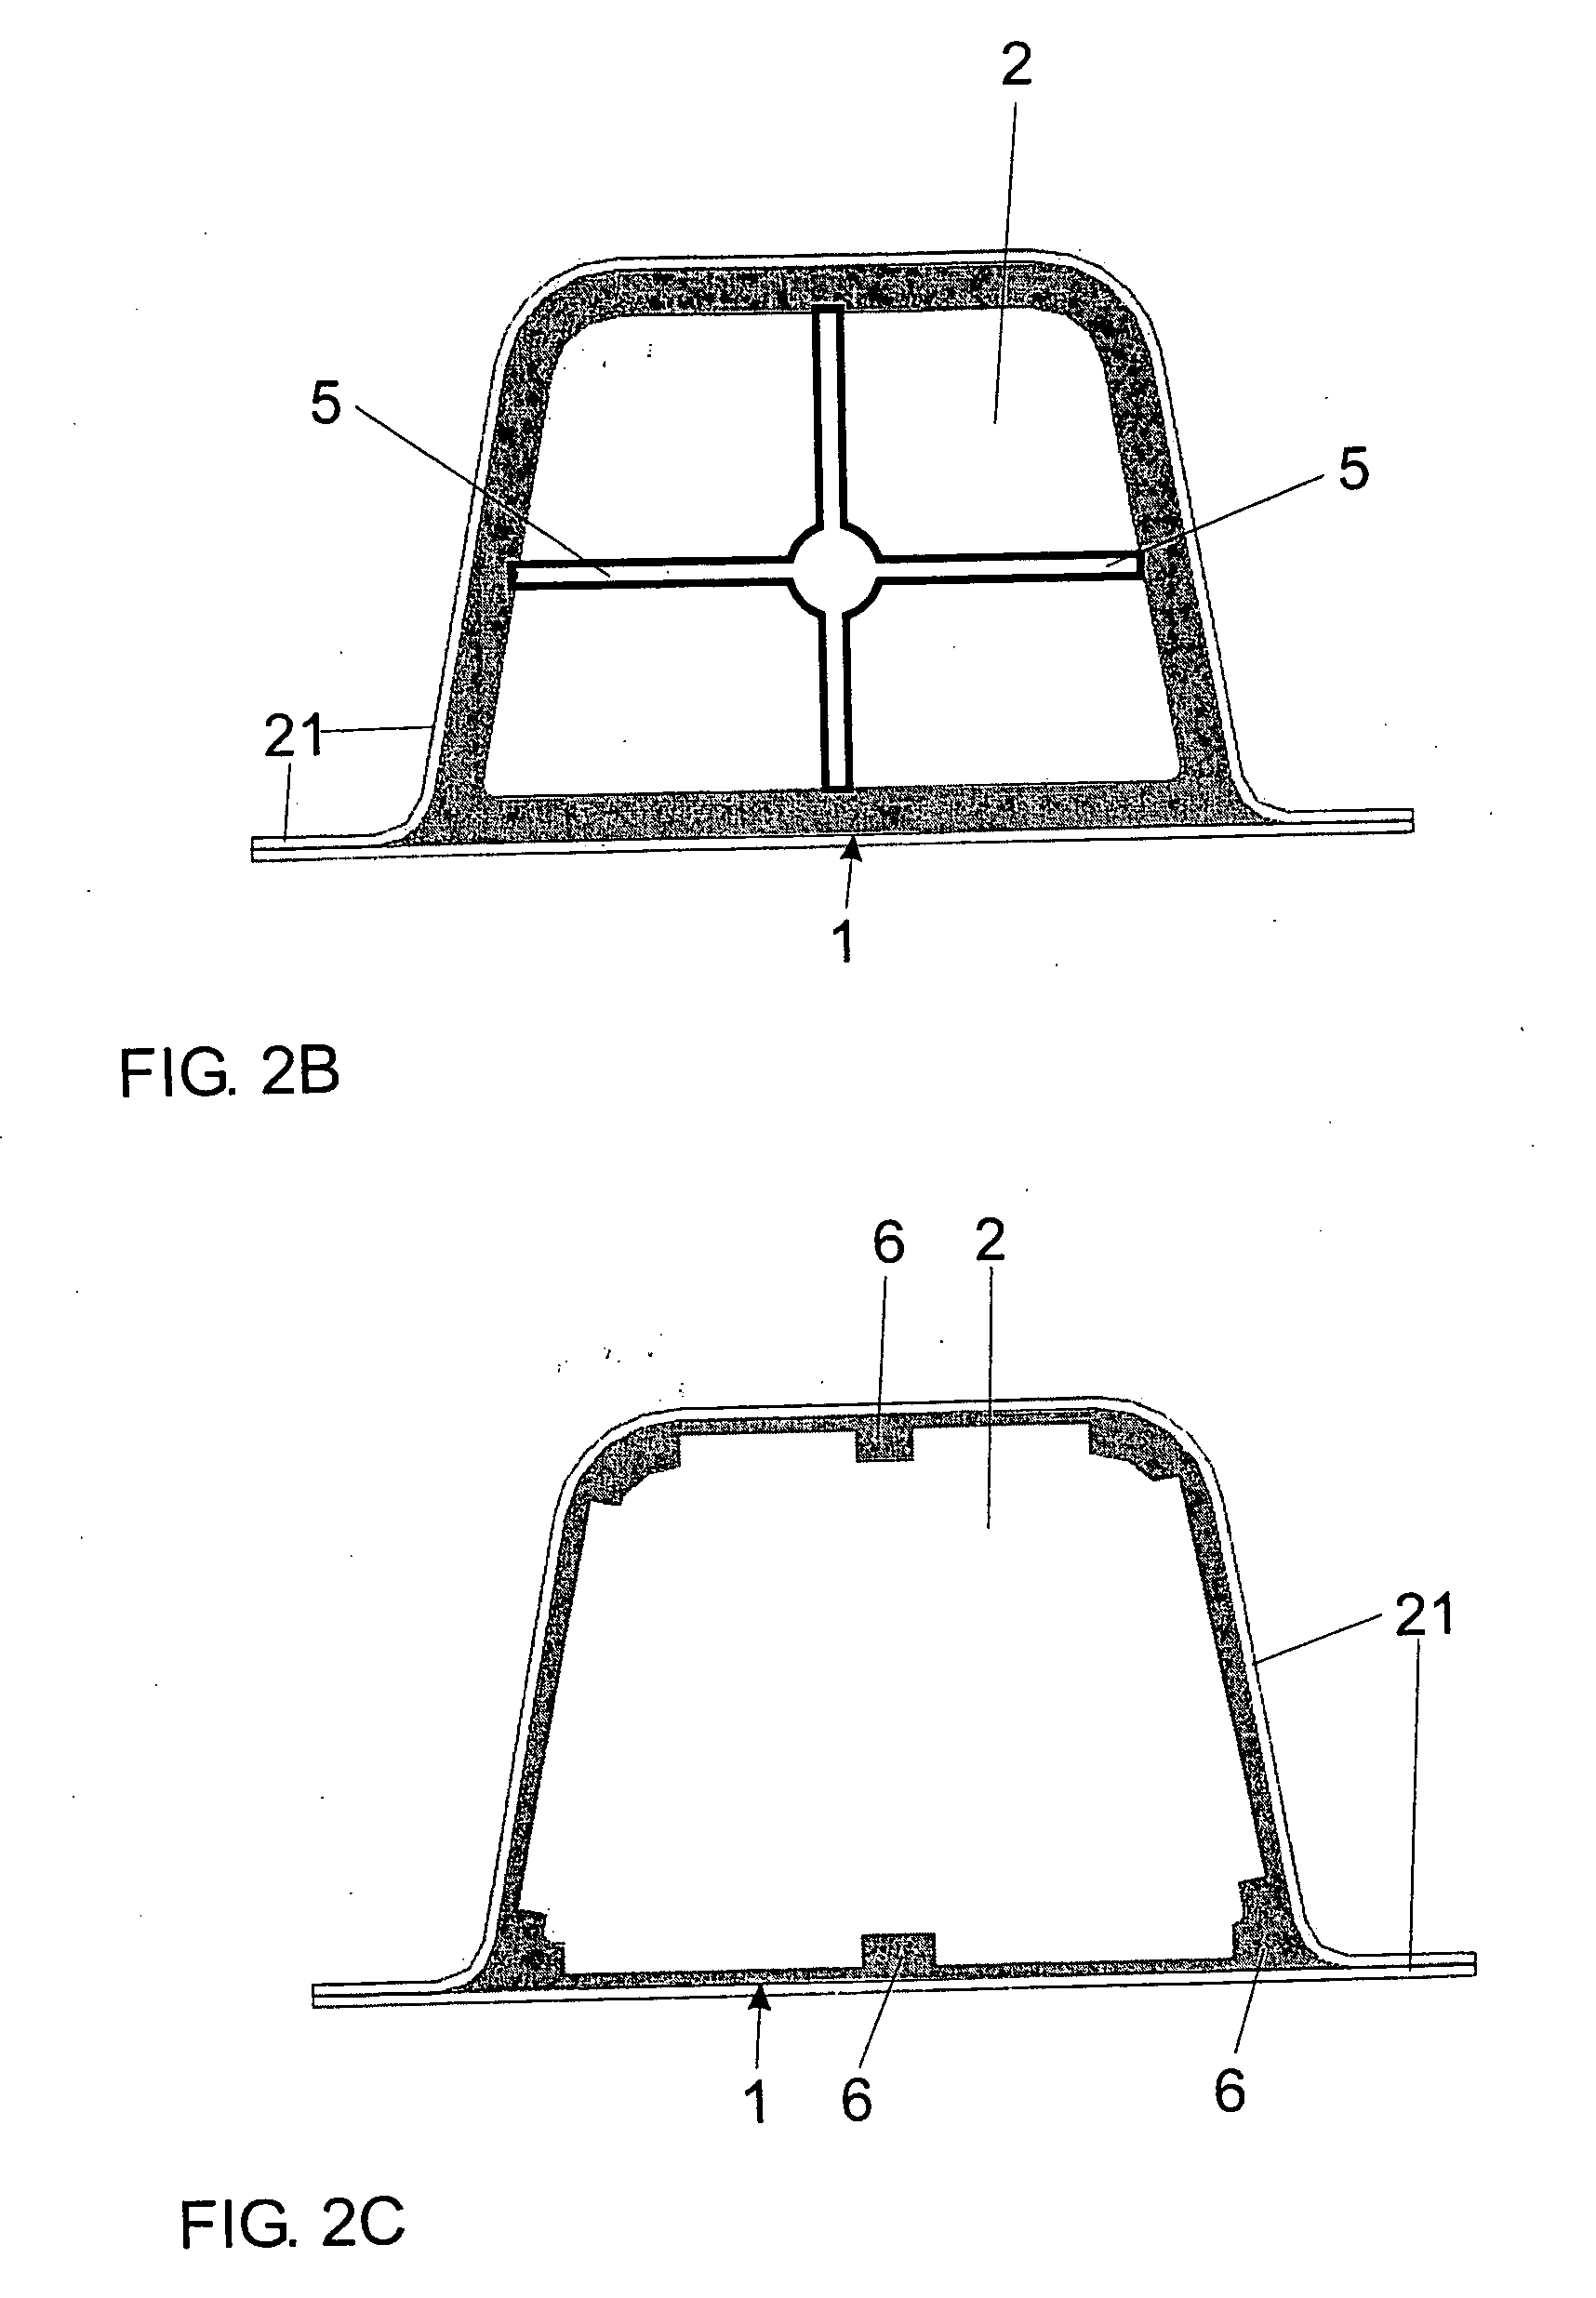 Reinforcing System for Reinforcing a Cavity of a Structural Element